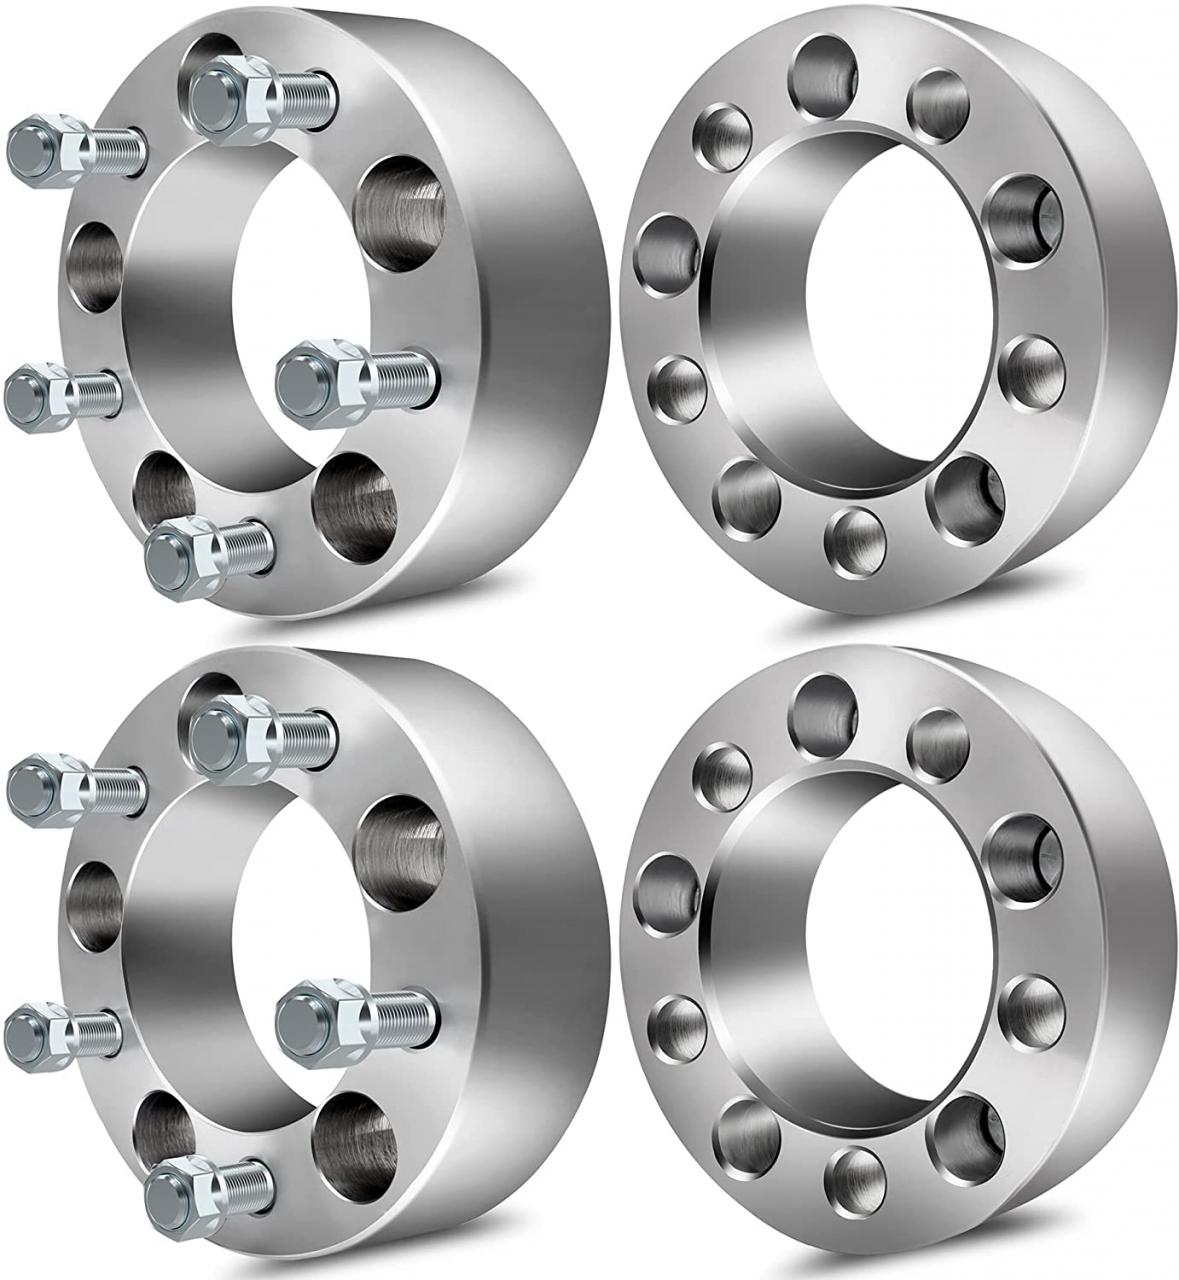 Buy ECCPP 4X 5 Lug Wheel Spacers 2 inch Wheel Spacer Adapter 2 5x4.5 to  5x4.5 5x114.3 to 5x114.3 Fit for Liberty for Wrangler for Cherokee for  Grand for Cherokee Online in UK. B01BV2WFZ8